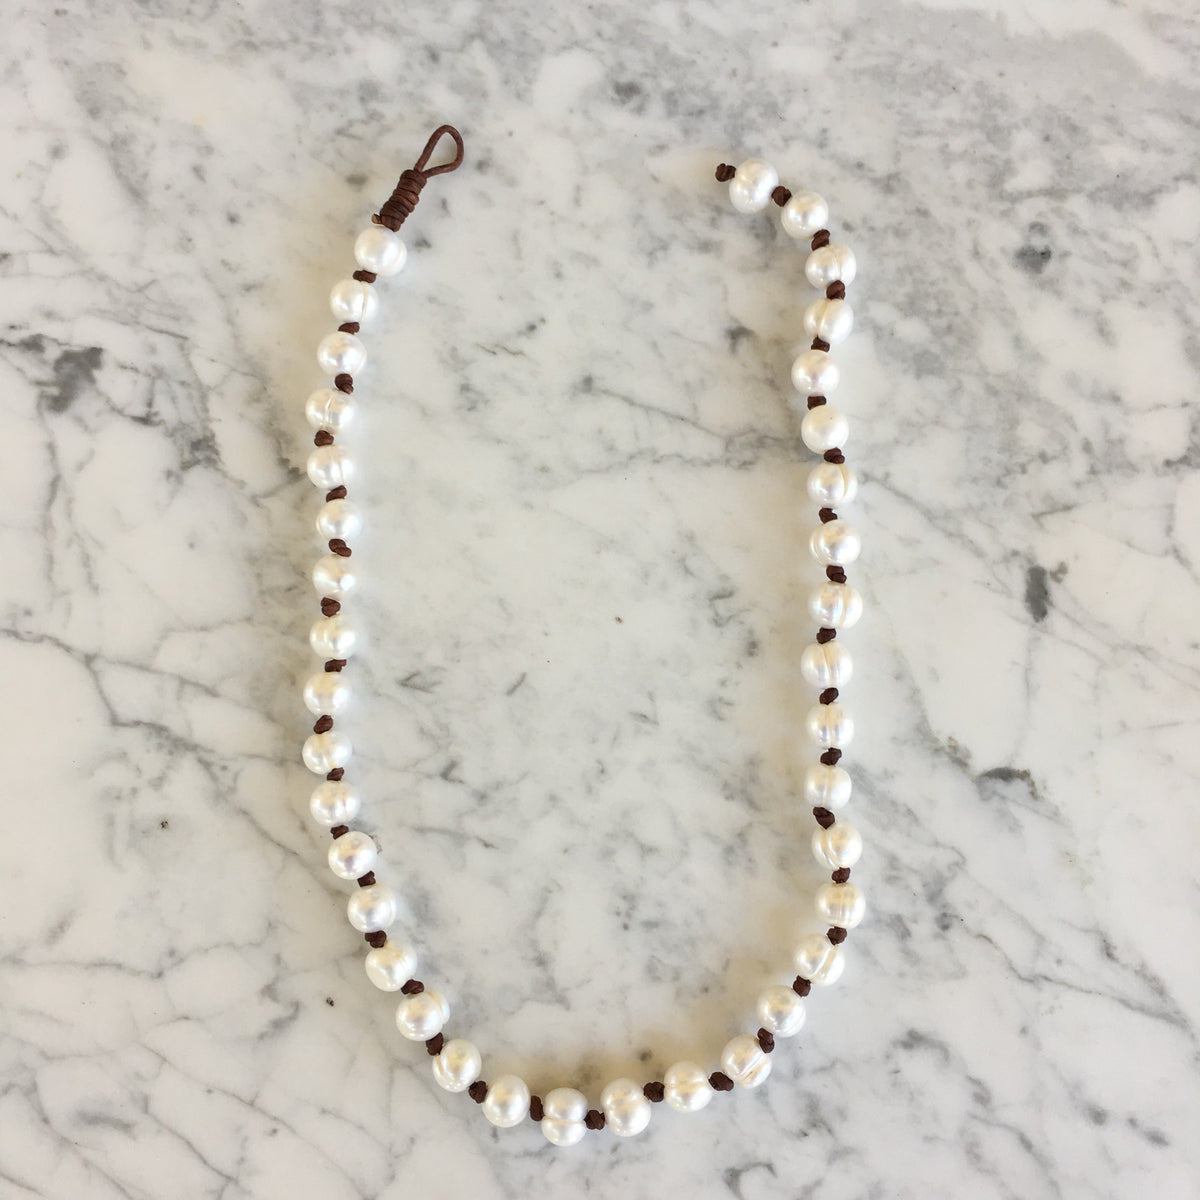 Leather pearl necklace,, 2mm leather cord, Single white pearl choker  necklace, Affordable gift, Free shipping, Organza bag included